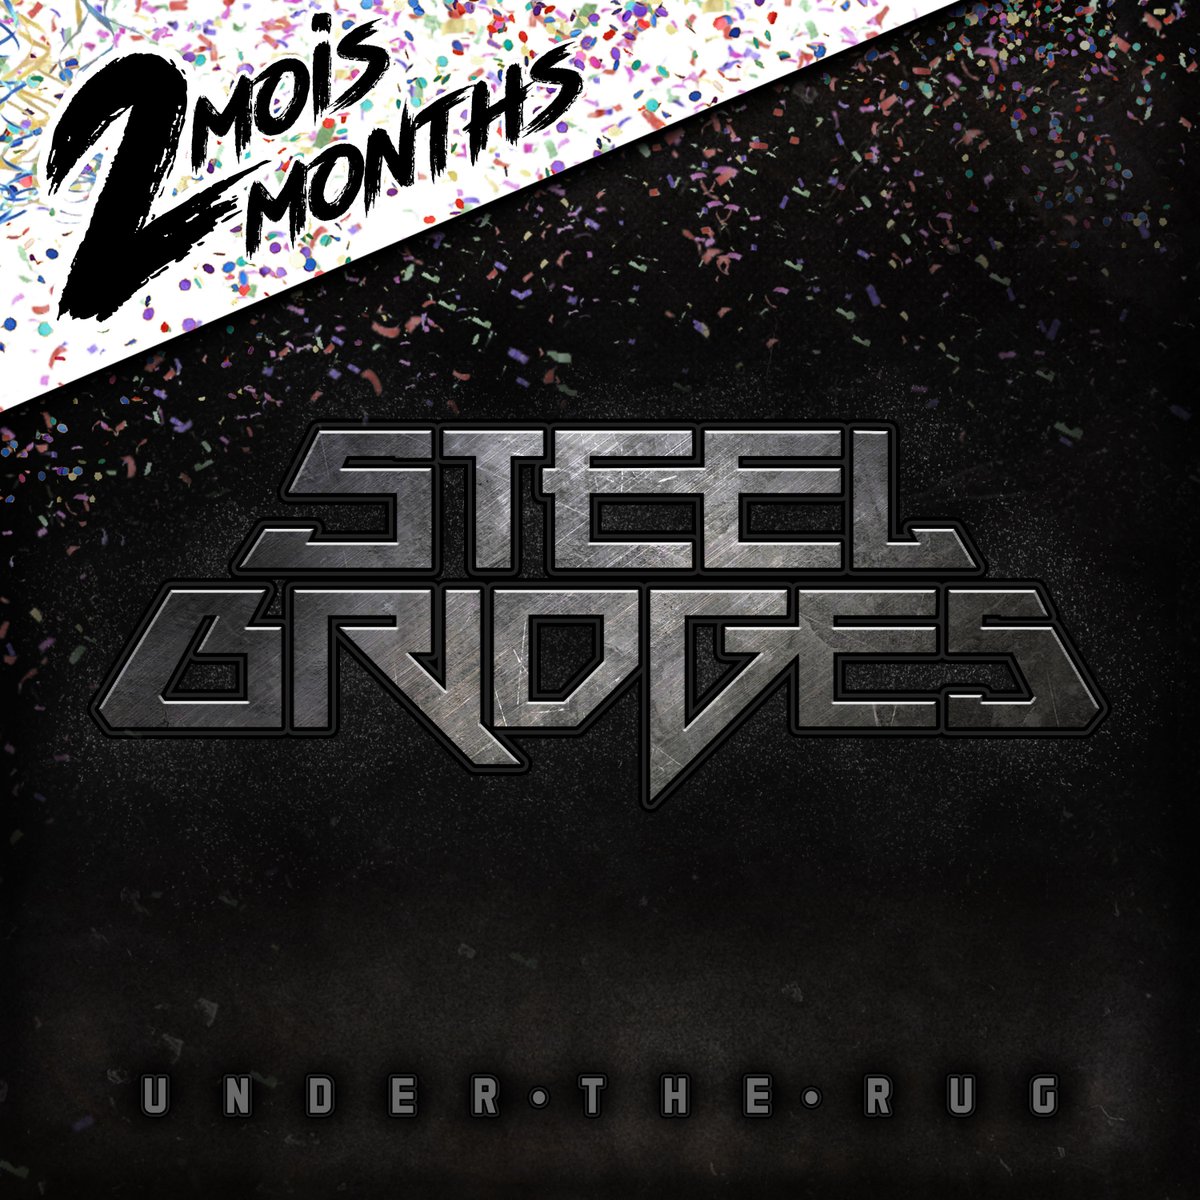 Steel Bridges - “Under The Rug”. Metallic fast skatepunk. steelbridges.fanlink.to/UnderTheRug ICYMI - It’s already been 2 months since I released my latest Steel Bridges album, packed with 8 fast and intense tracks with a melodic but quite aggressive vibe.